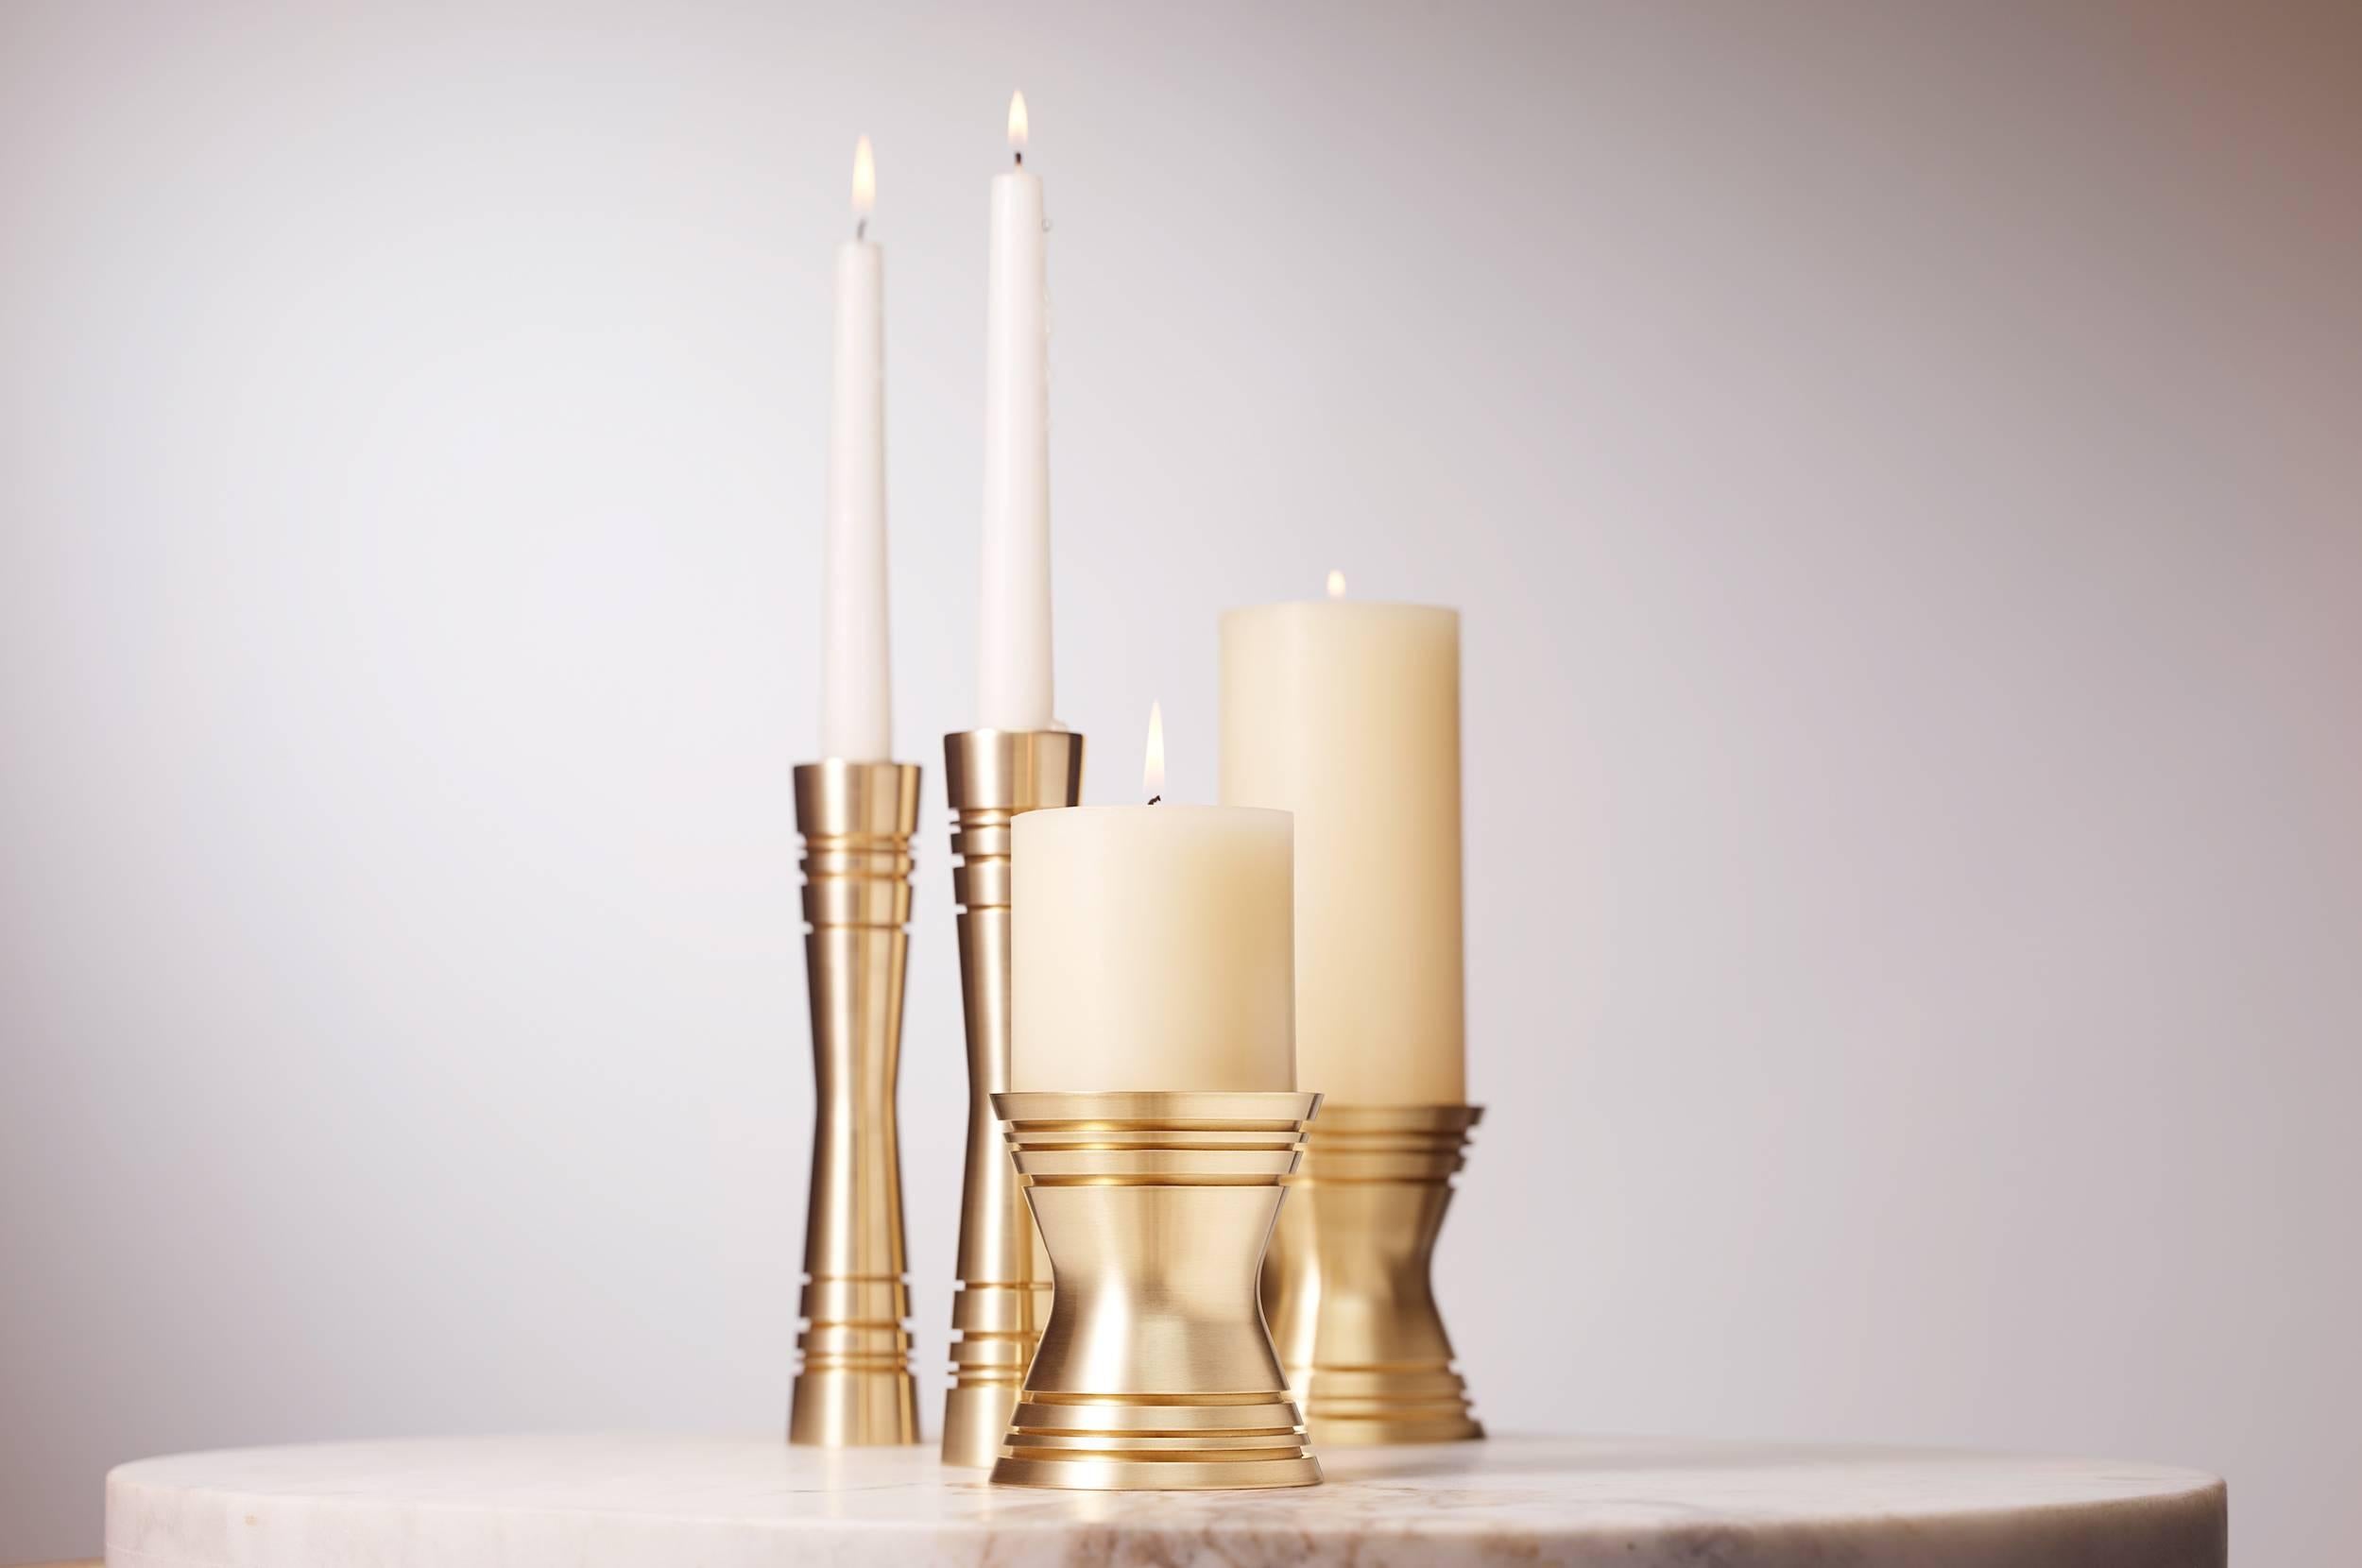 Polished Double Taper Solid Brass Taper Candleholder 2017 by Post & Gleam For Sale